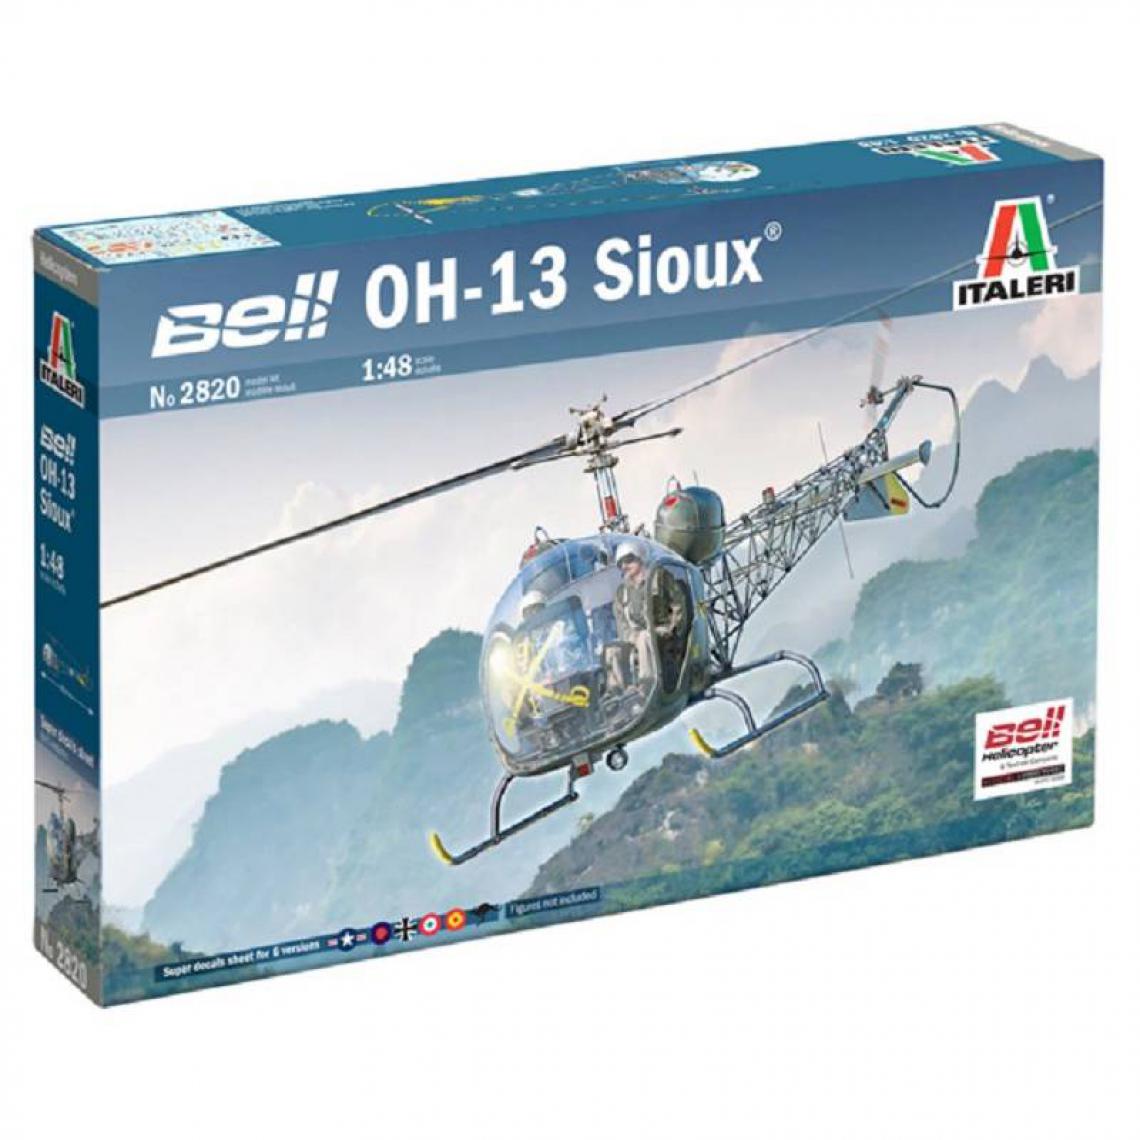 Italeri - Maquette Hélicoptère Bell Oh-13 Sioux - Hélicoptères